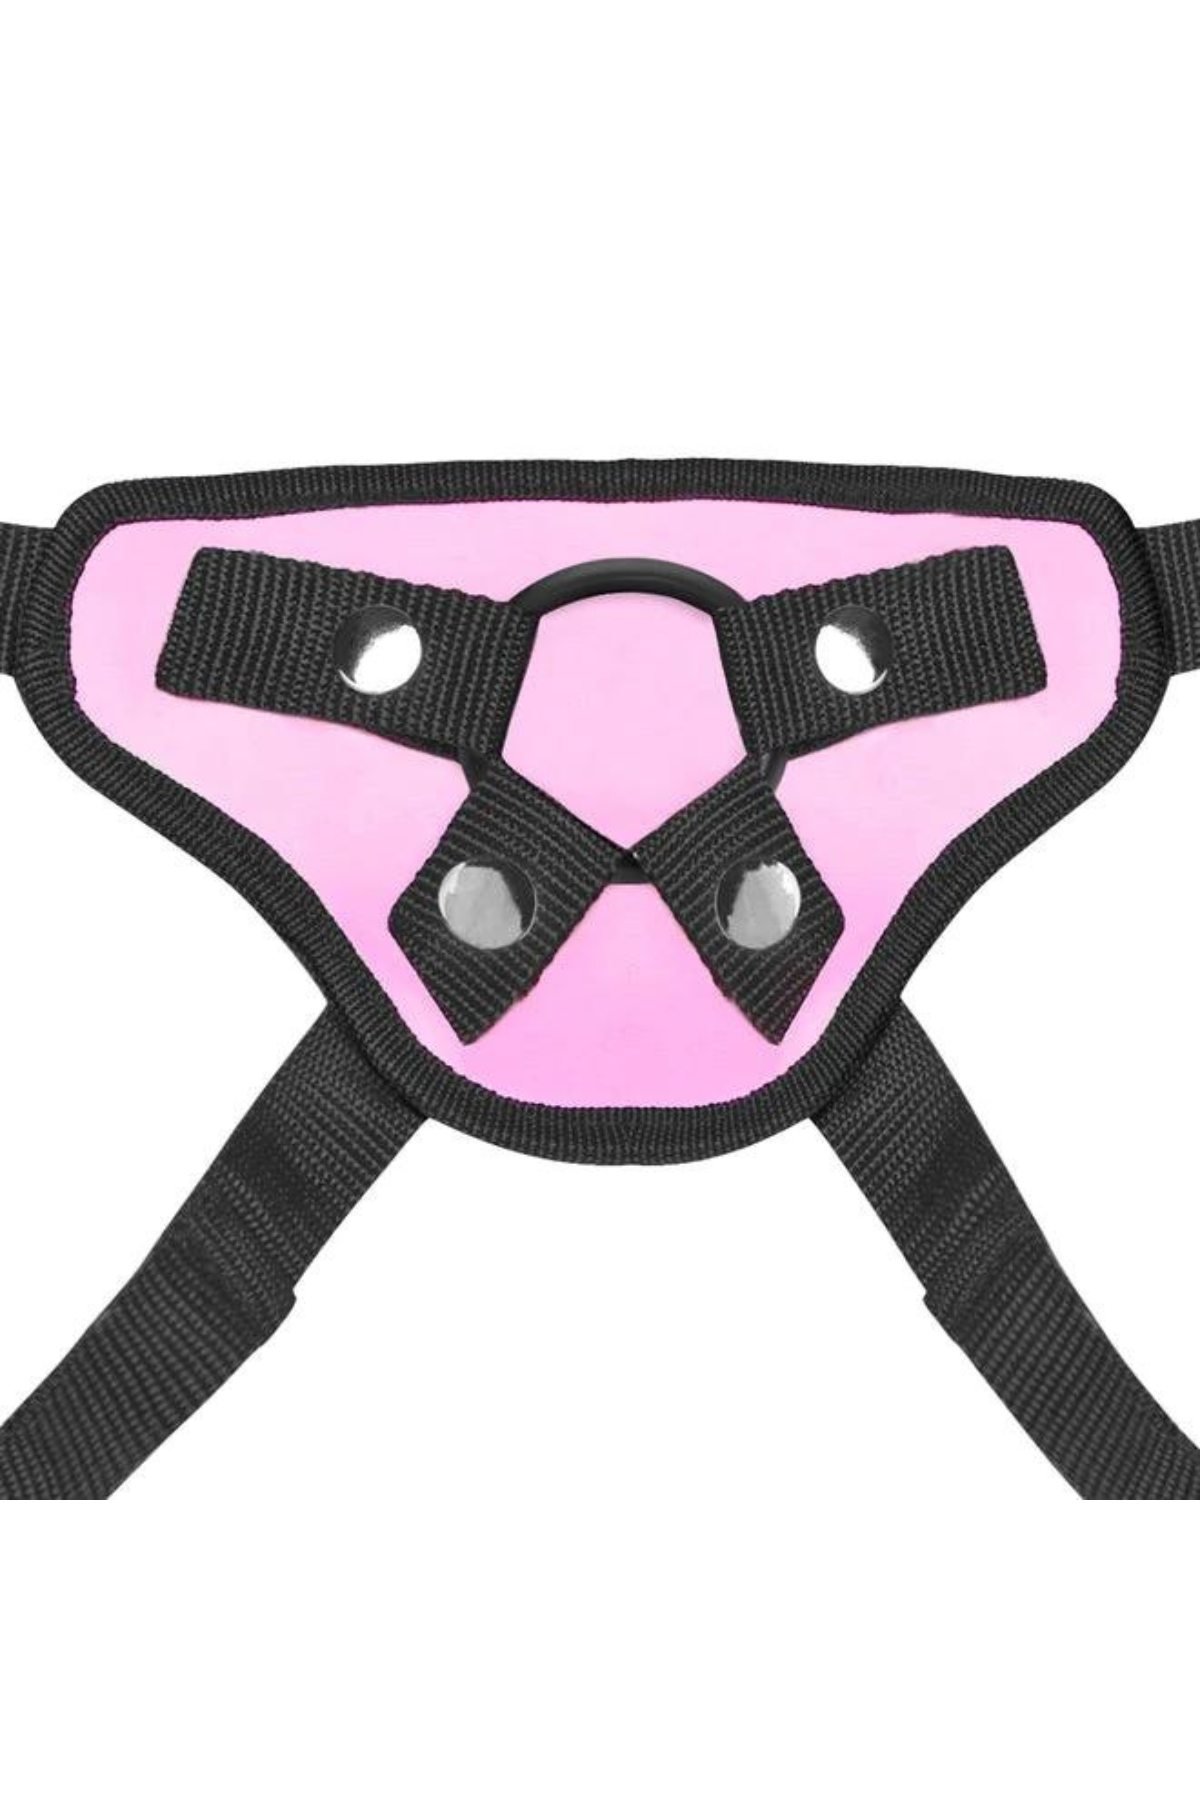 Pretty In Pink Strap-On Harness